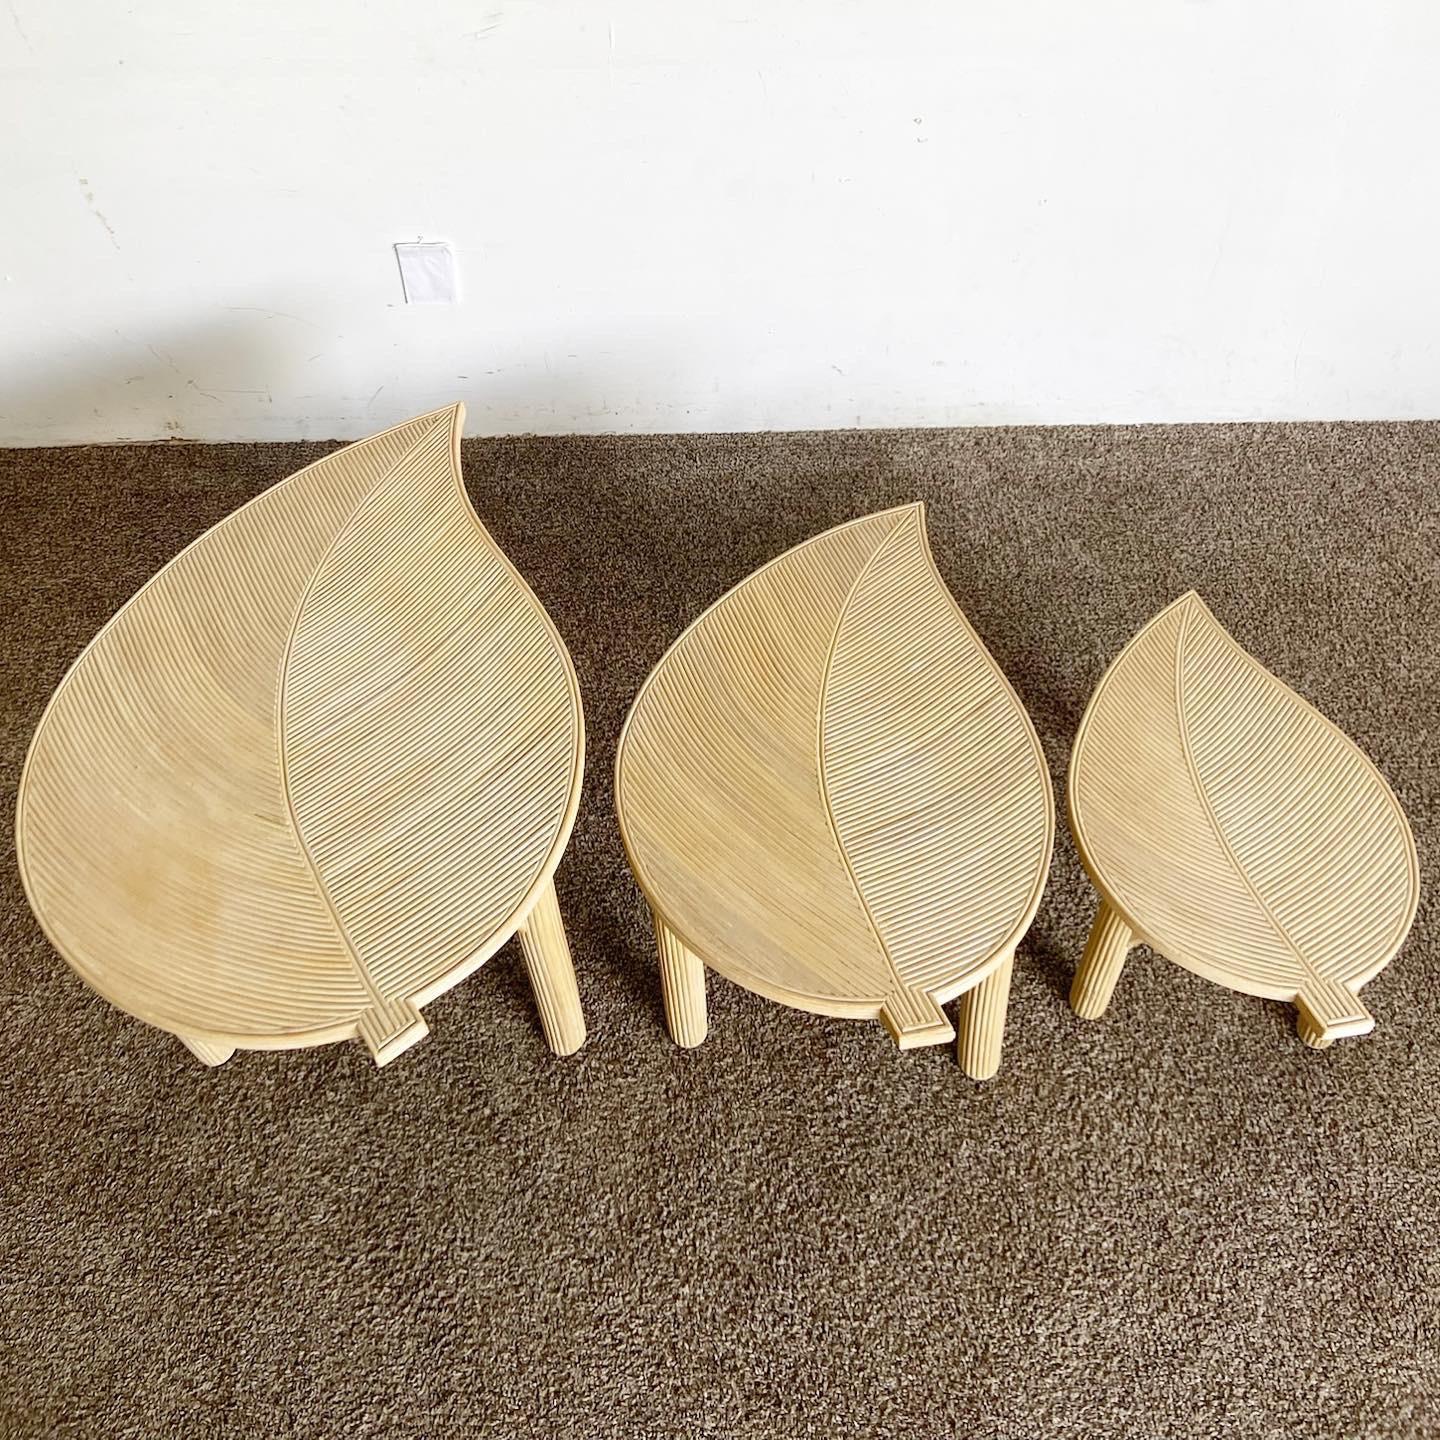 Late 20th Century Boho Chic Pencil Reed Leaf Nesting Tables - Set of 3 For Sale